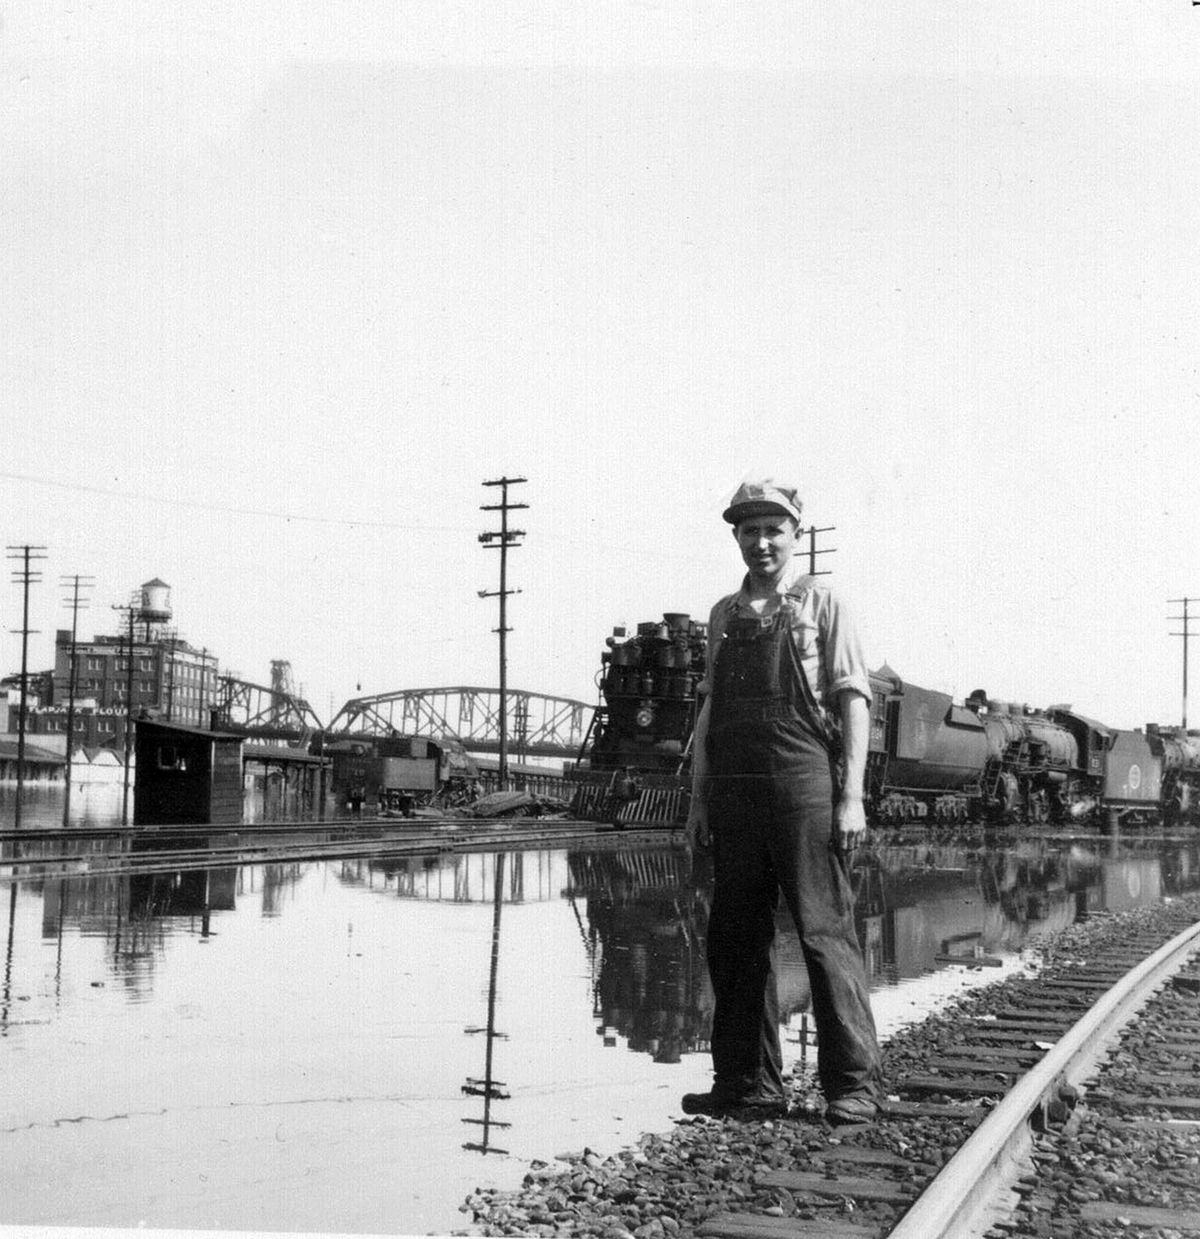 Kenny Prager poses in front of locomotives in the Spokane, Portland & Seattle rail yard in Portland during the May 1948 flood that wiped out the city of Vanport, Ore. (Courtesy of Mike Prager)